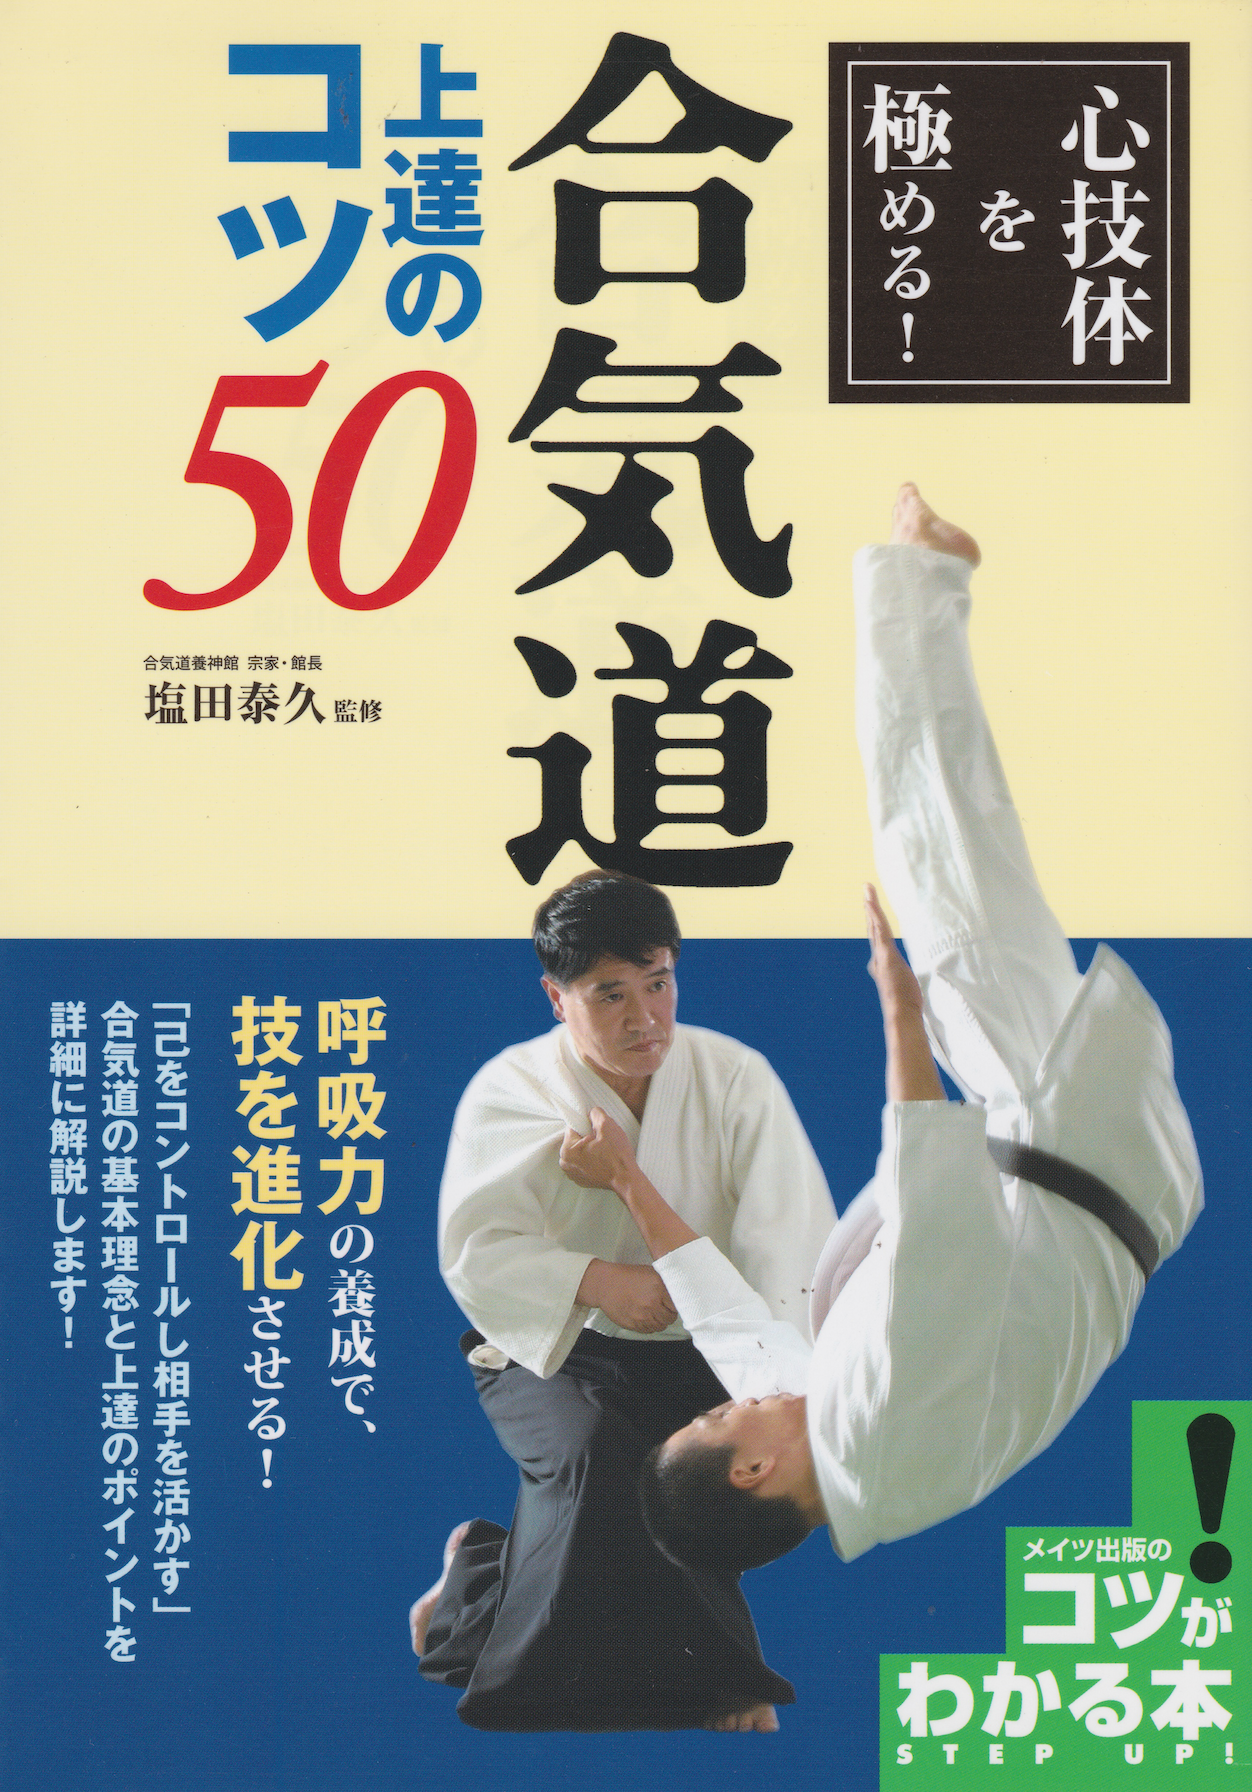 50 Tips for Improving Your Aikido Book by Yasuhisa Shioda (Preowned) - Budovideos Inc